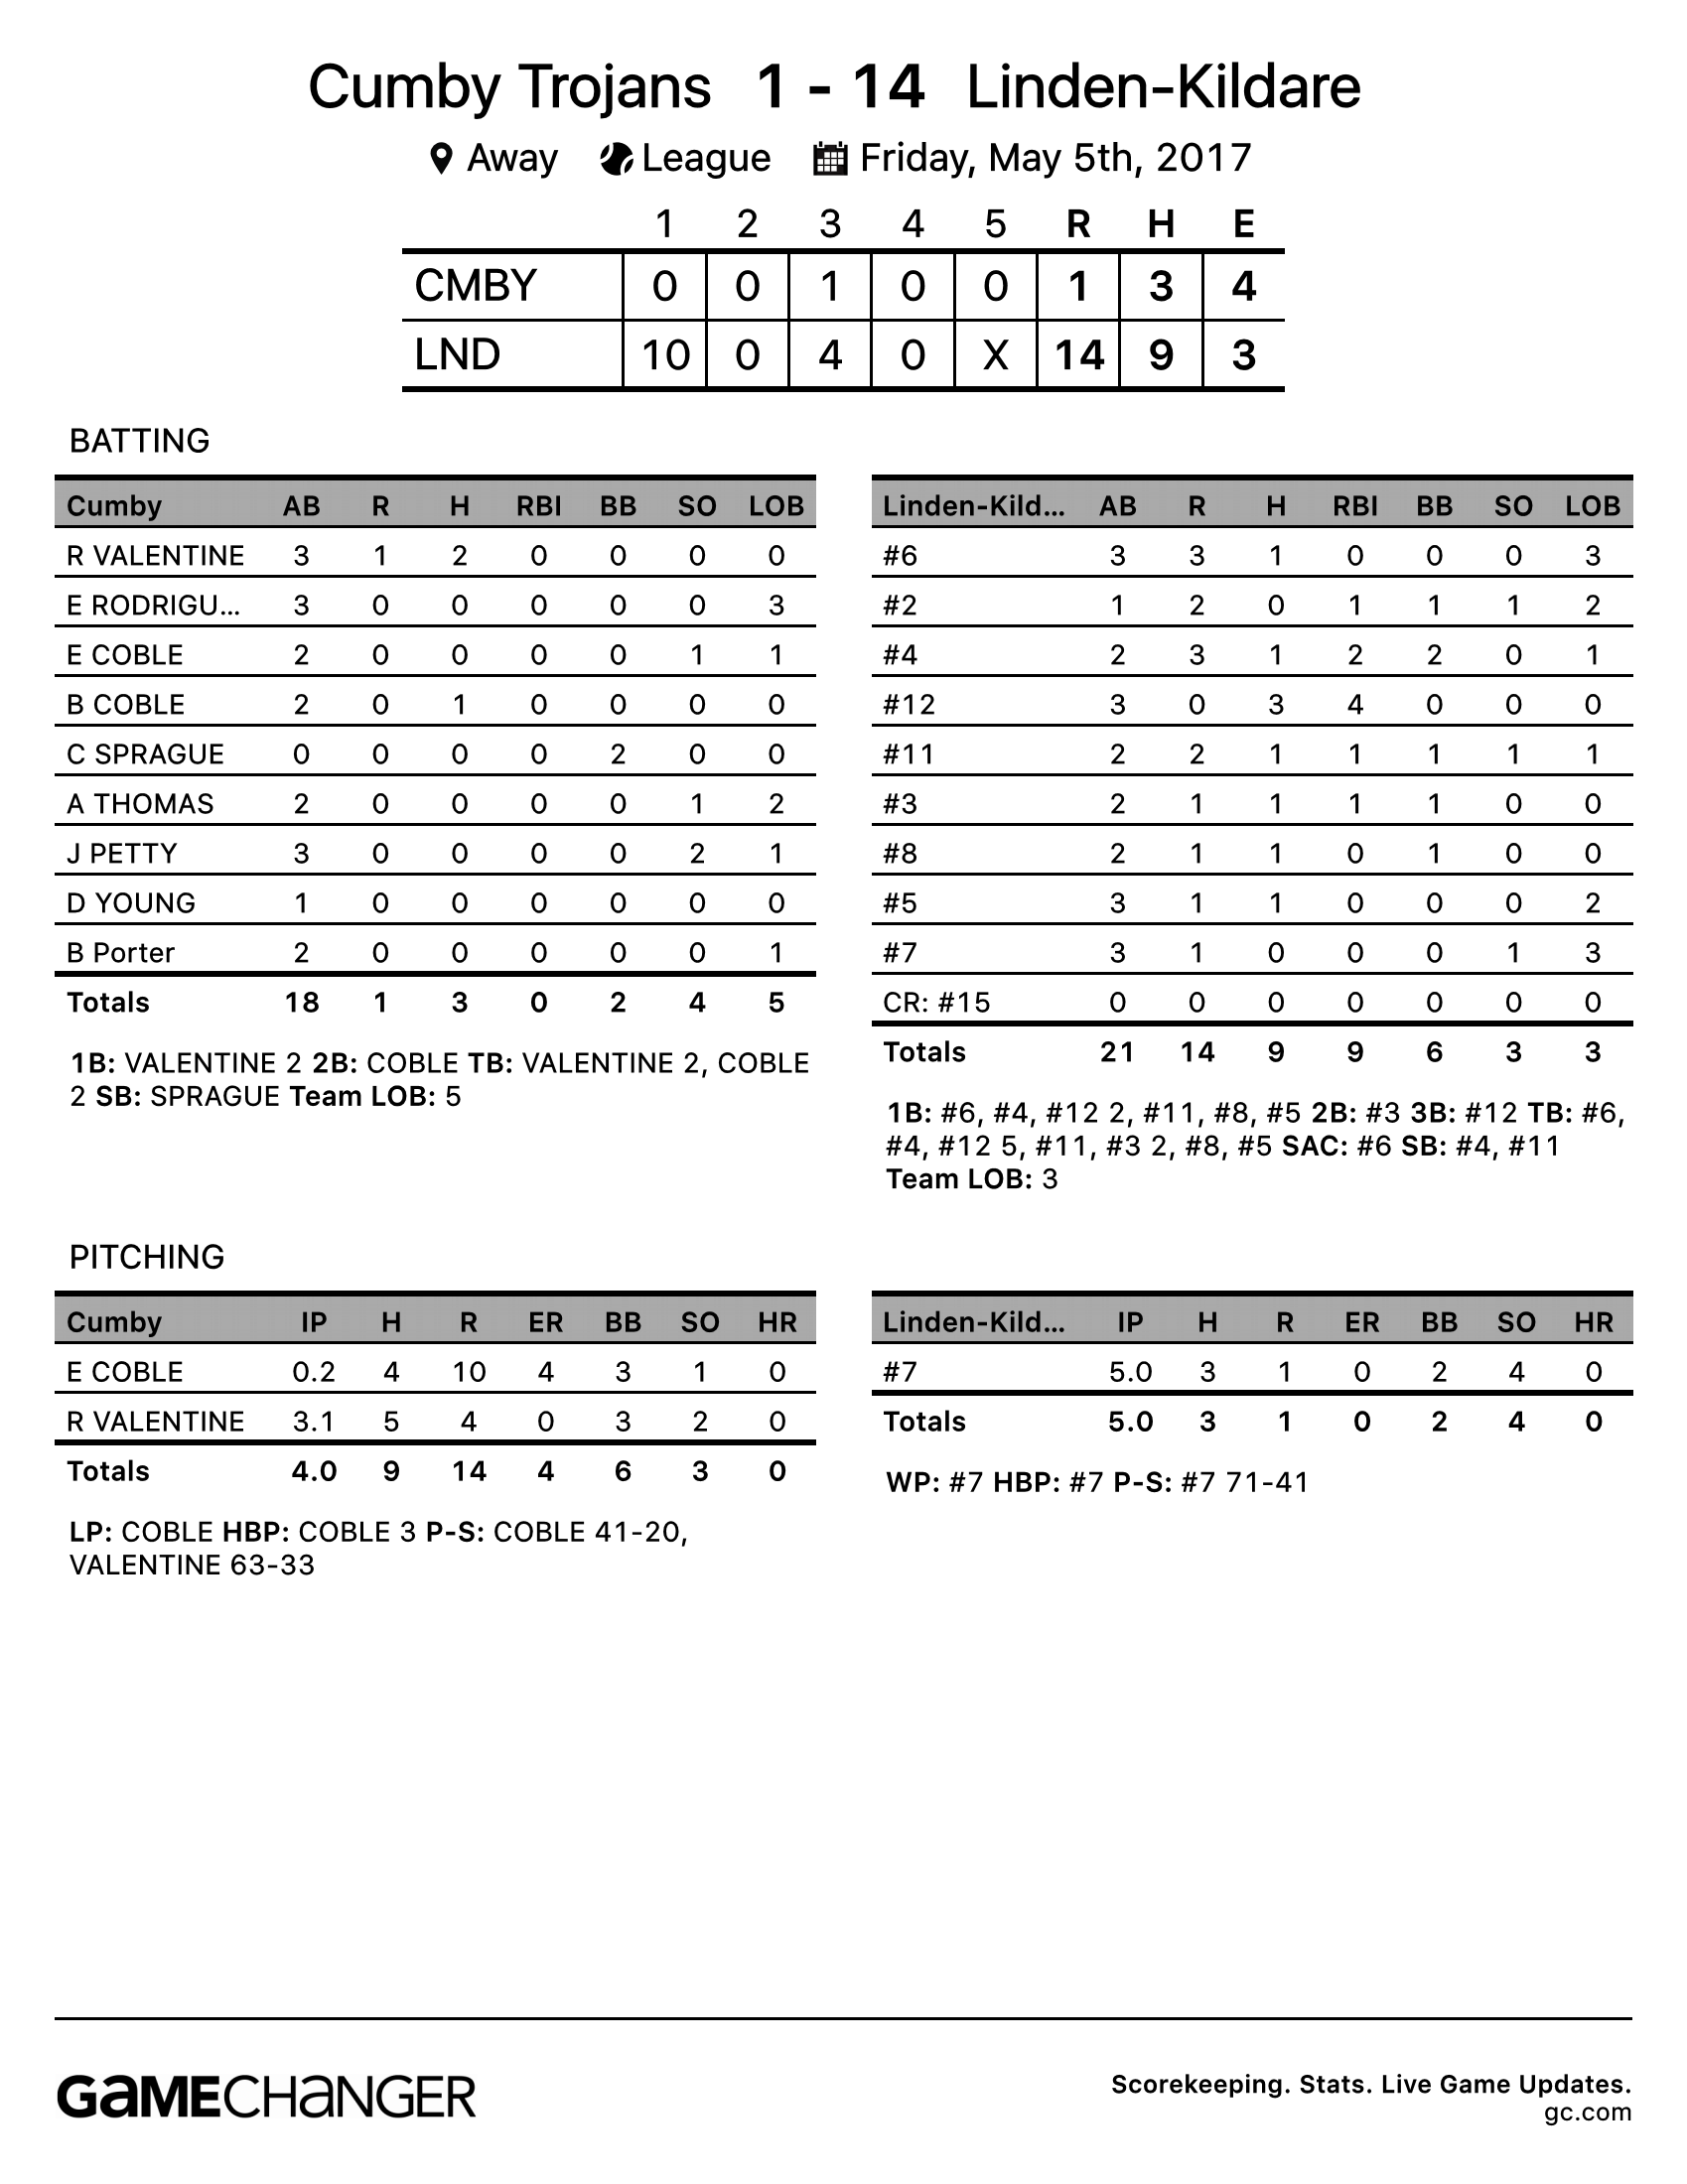 Cumby Baseball Eliminated from Playoffs Following Tough Losses to Linden-Kilgore(Box Score)